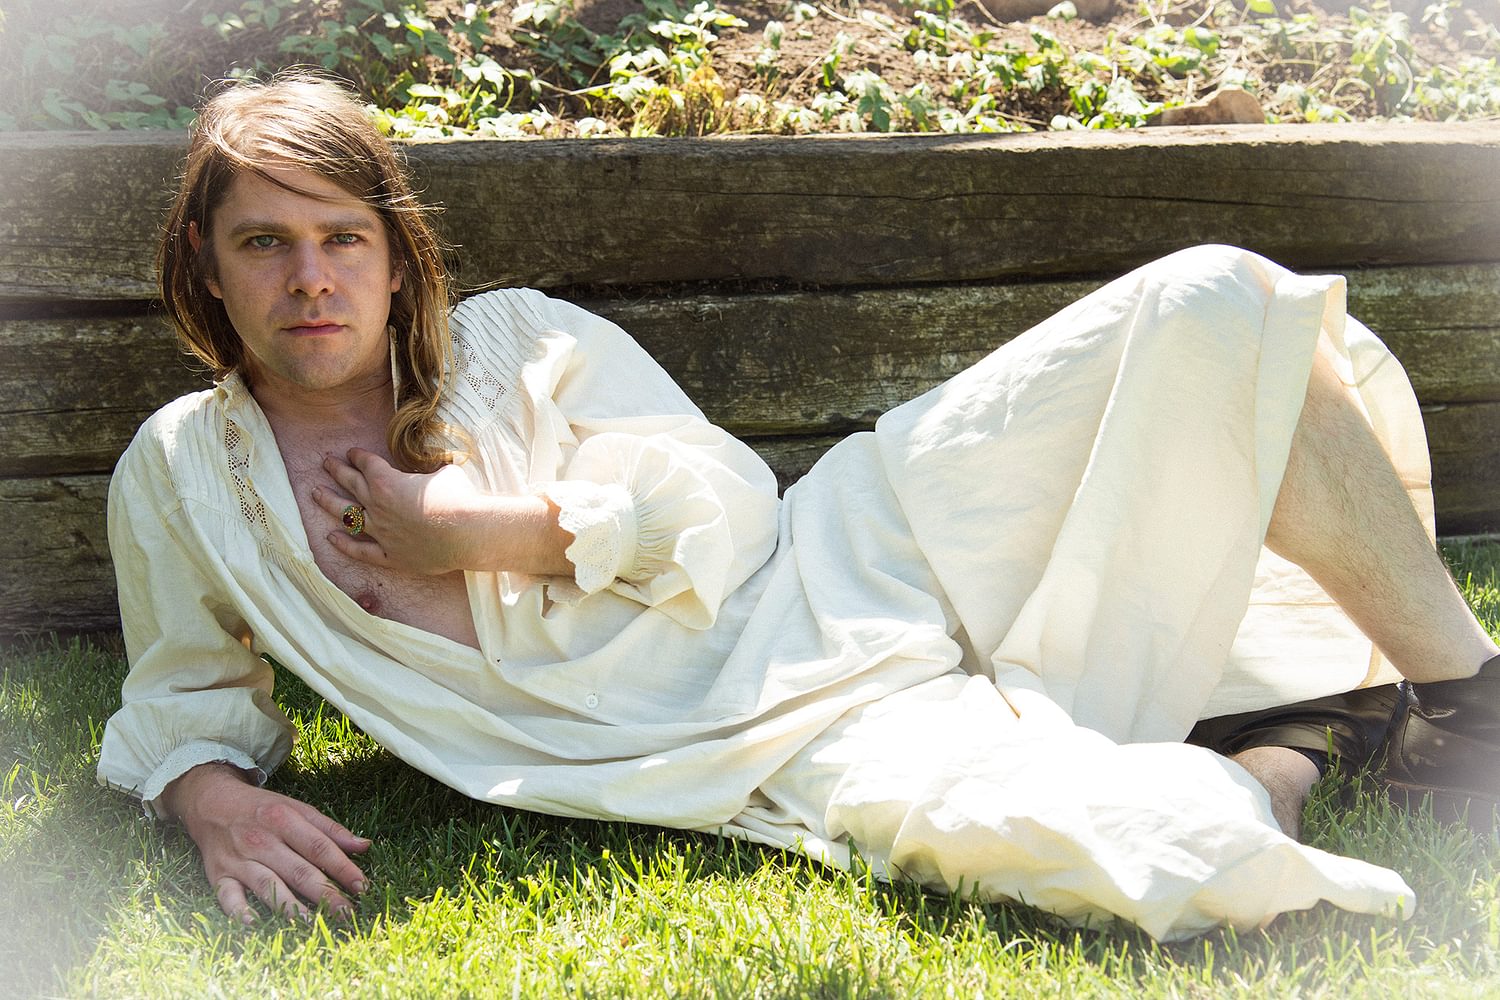 Ariel Pink and Black Lips announce joint North America tour